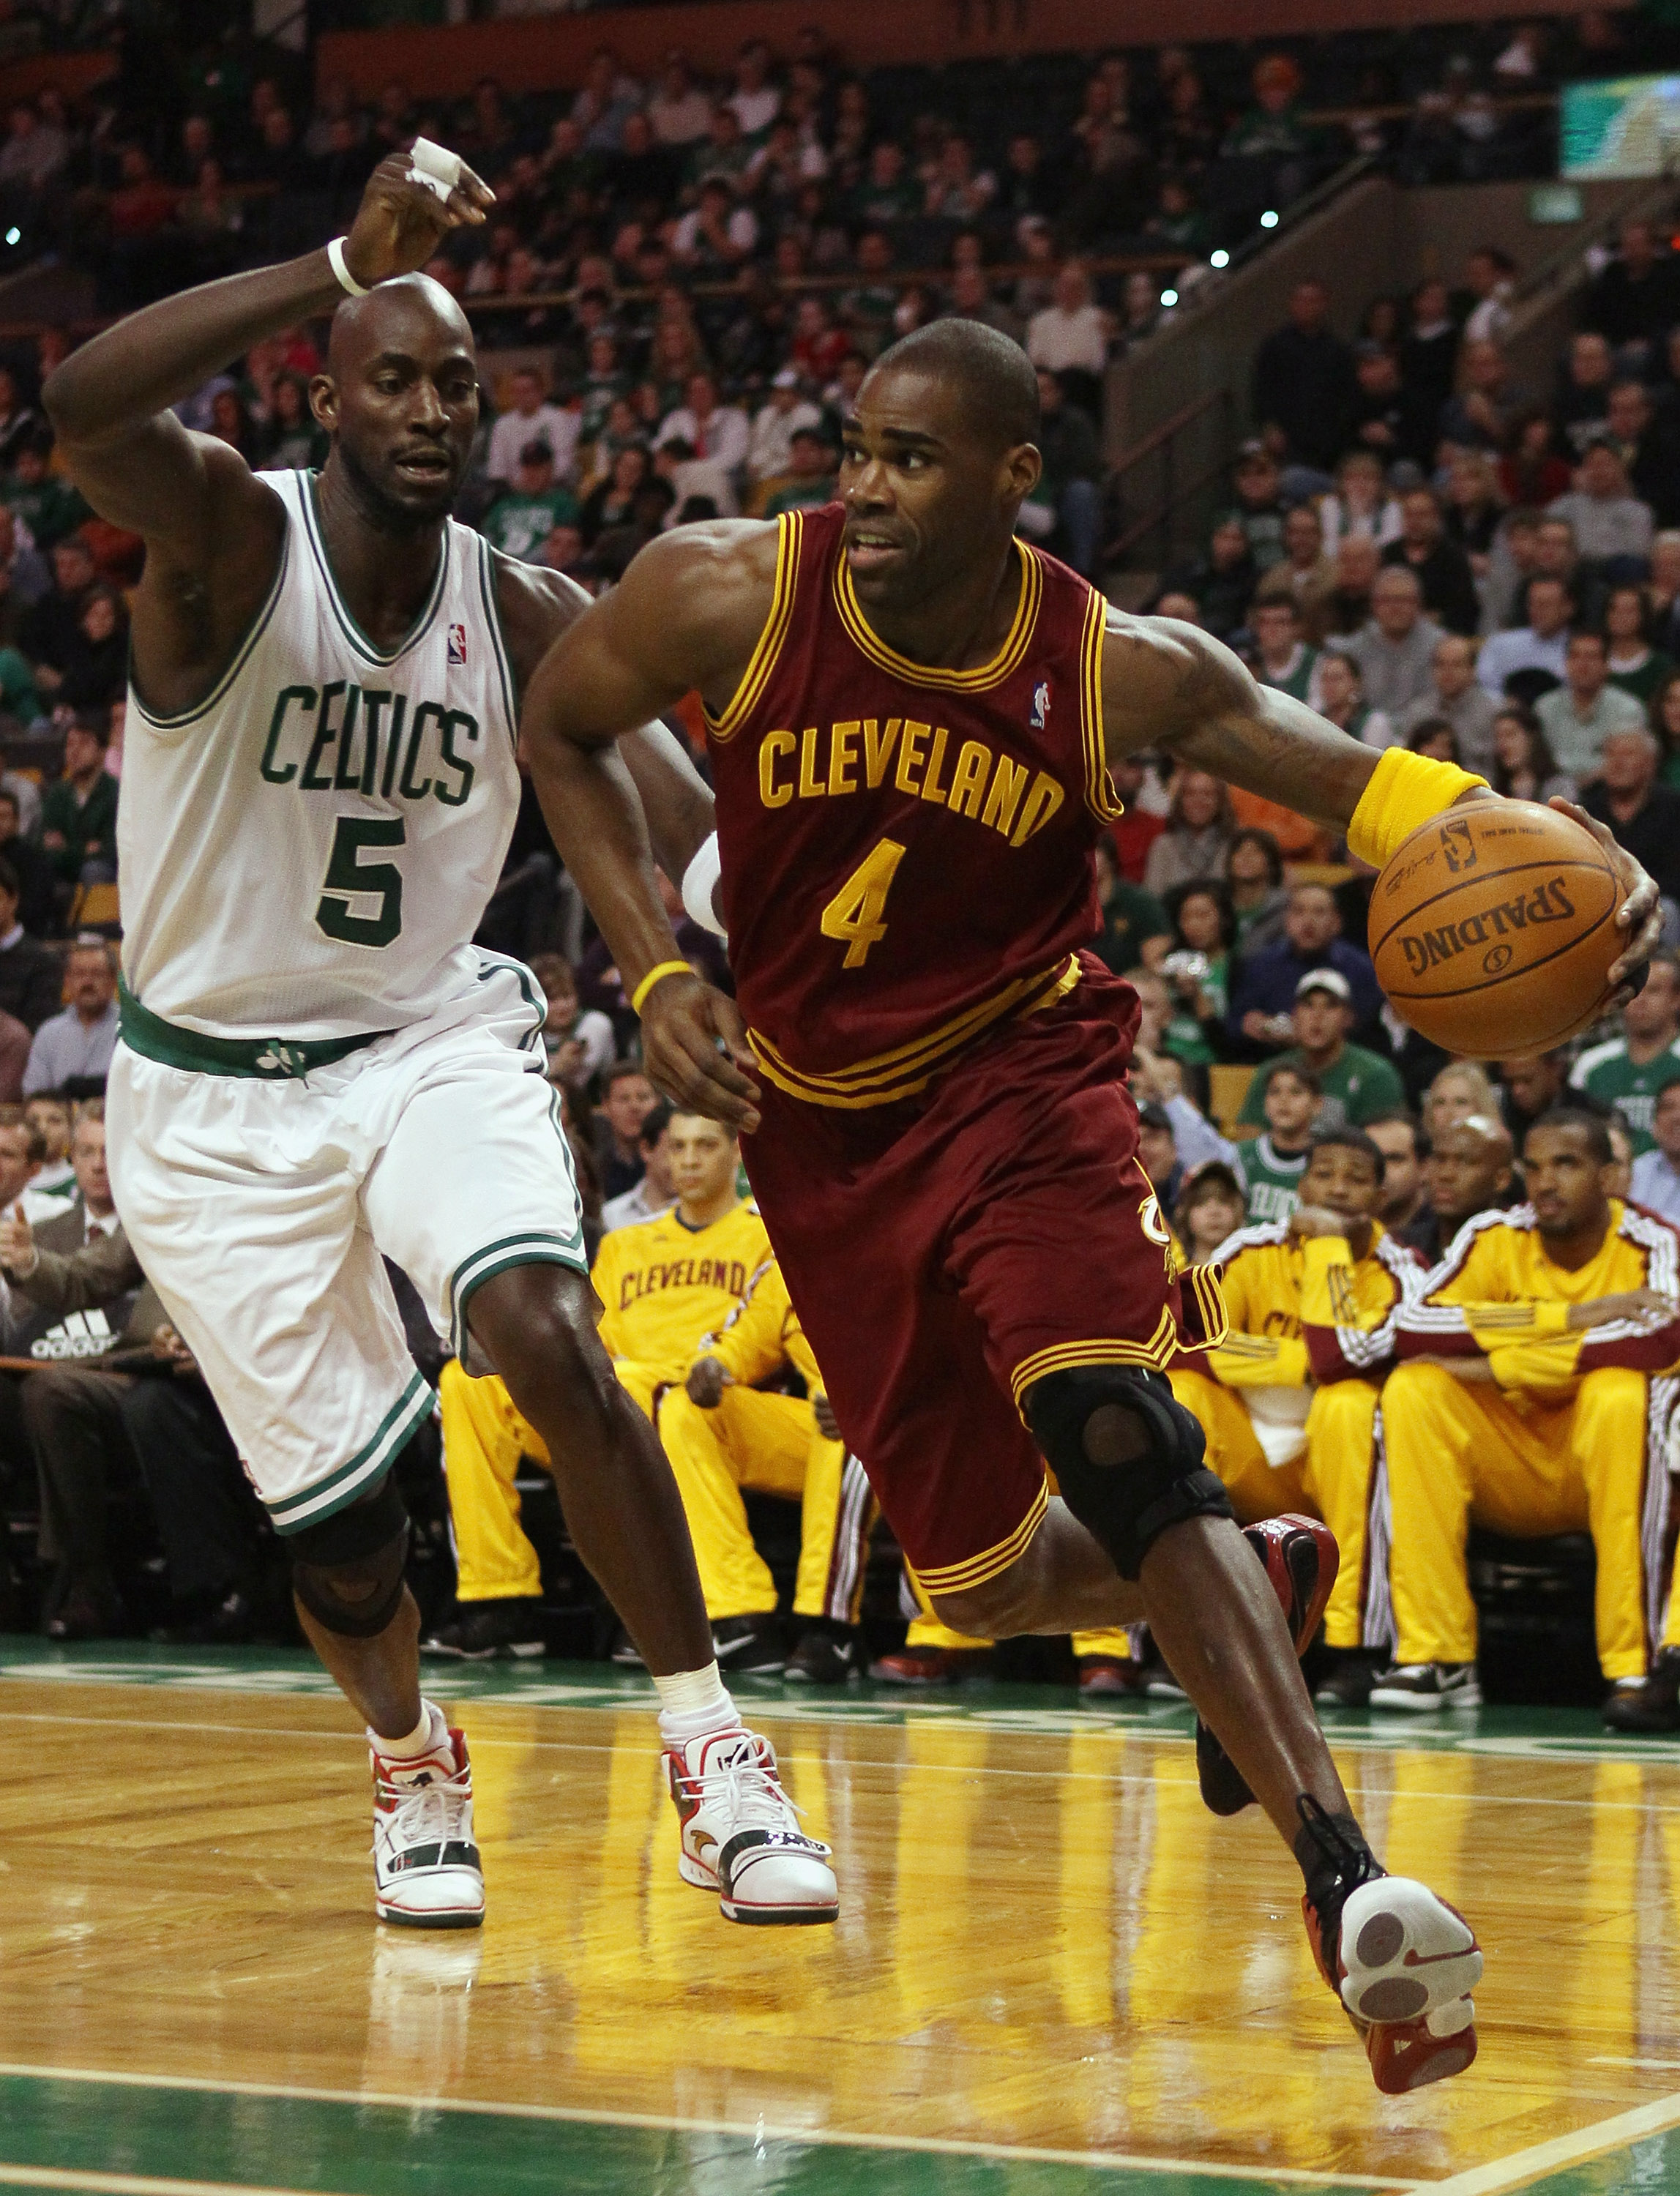 BOSTON, MA - JANUARY 25:  Antawn Jamison #4 of the Cleveland Cavaliers drives to the basket as  Kevin Garnett #5 of the Boston Celtics defends on January 25, 2011 at the TD Garden in Boston, Massachusetts.   NOTE TO USER: User expressly acknowledges and a